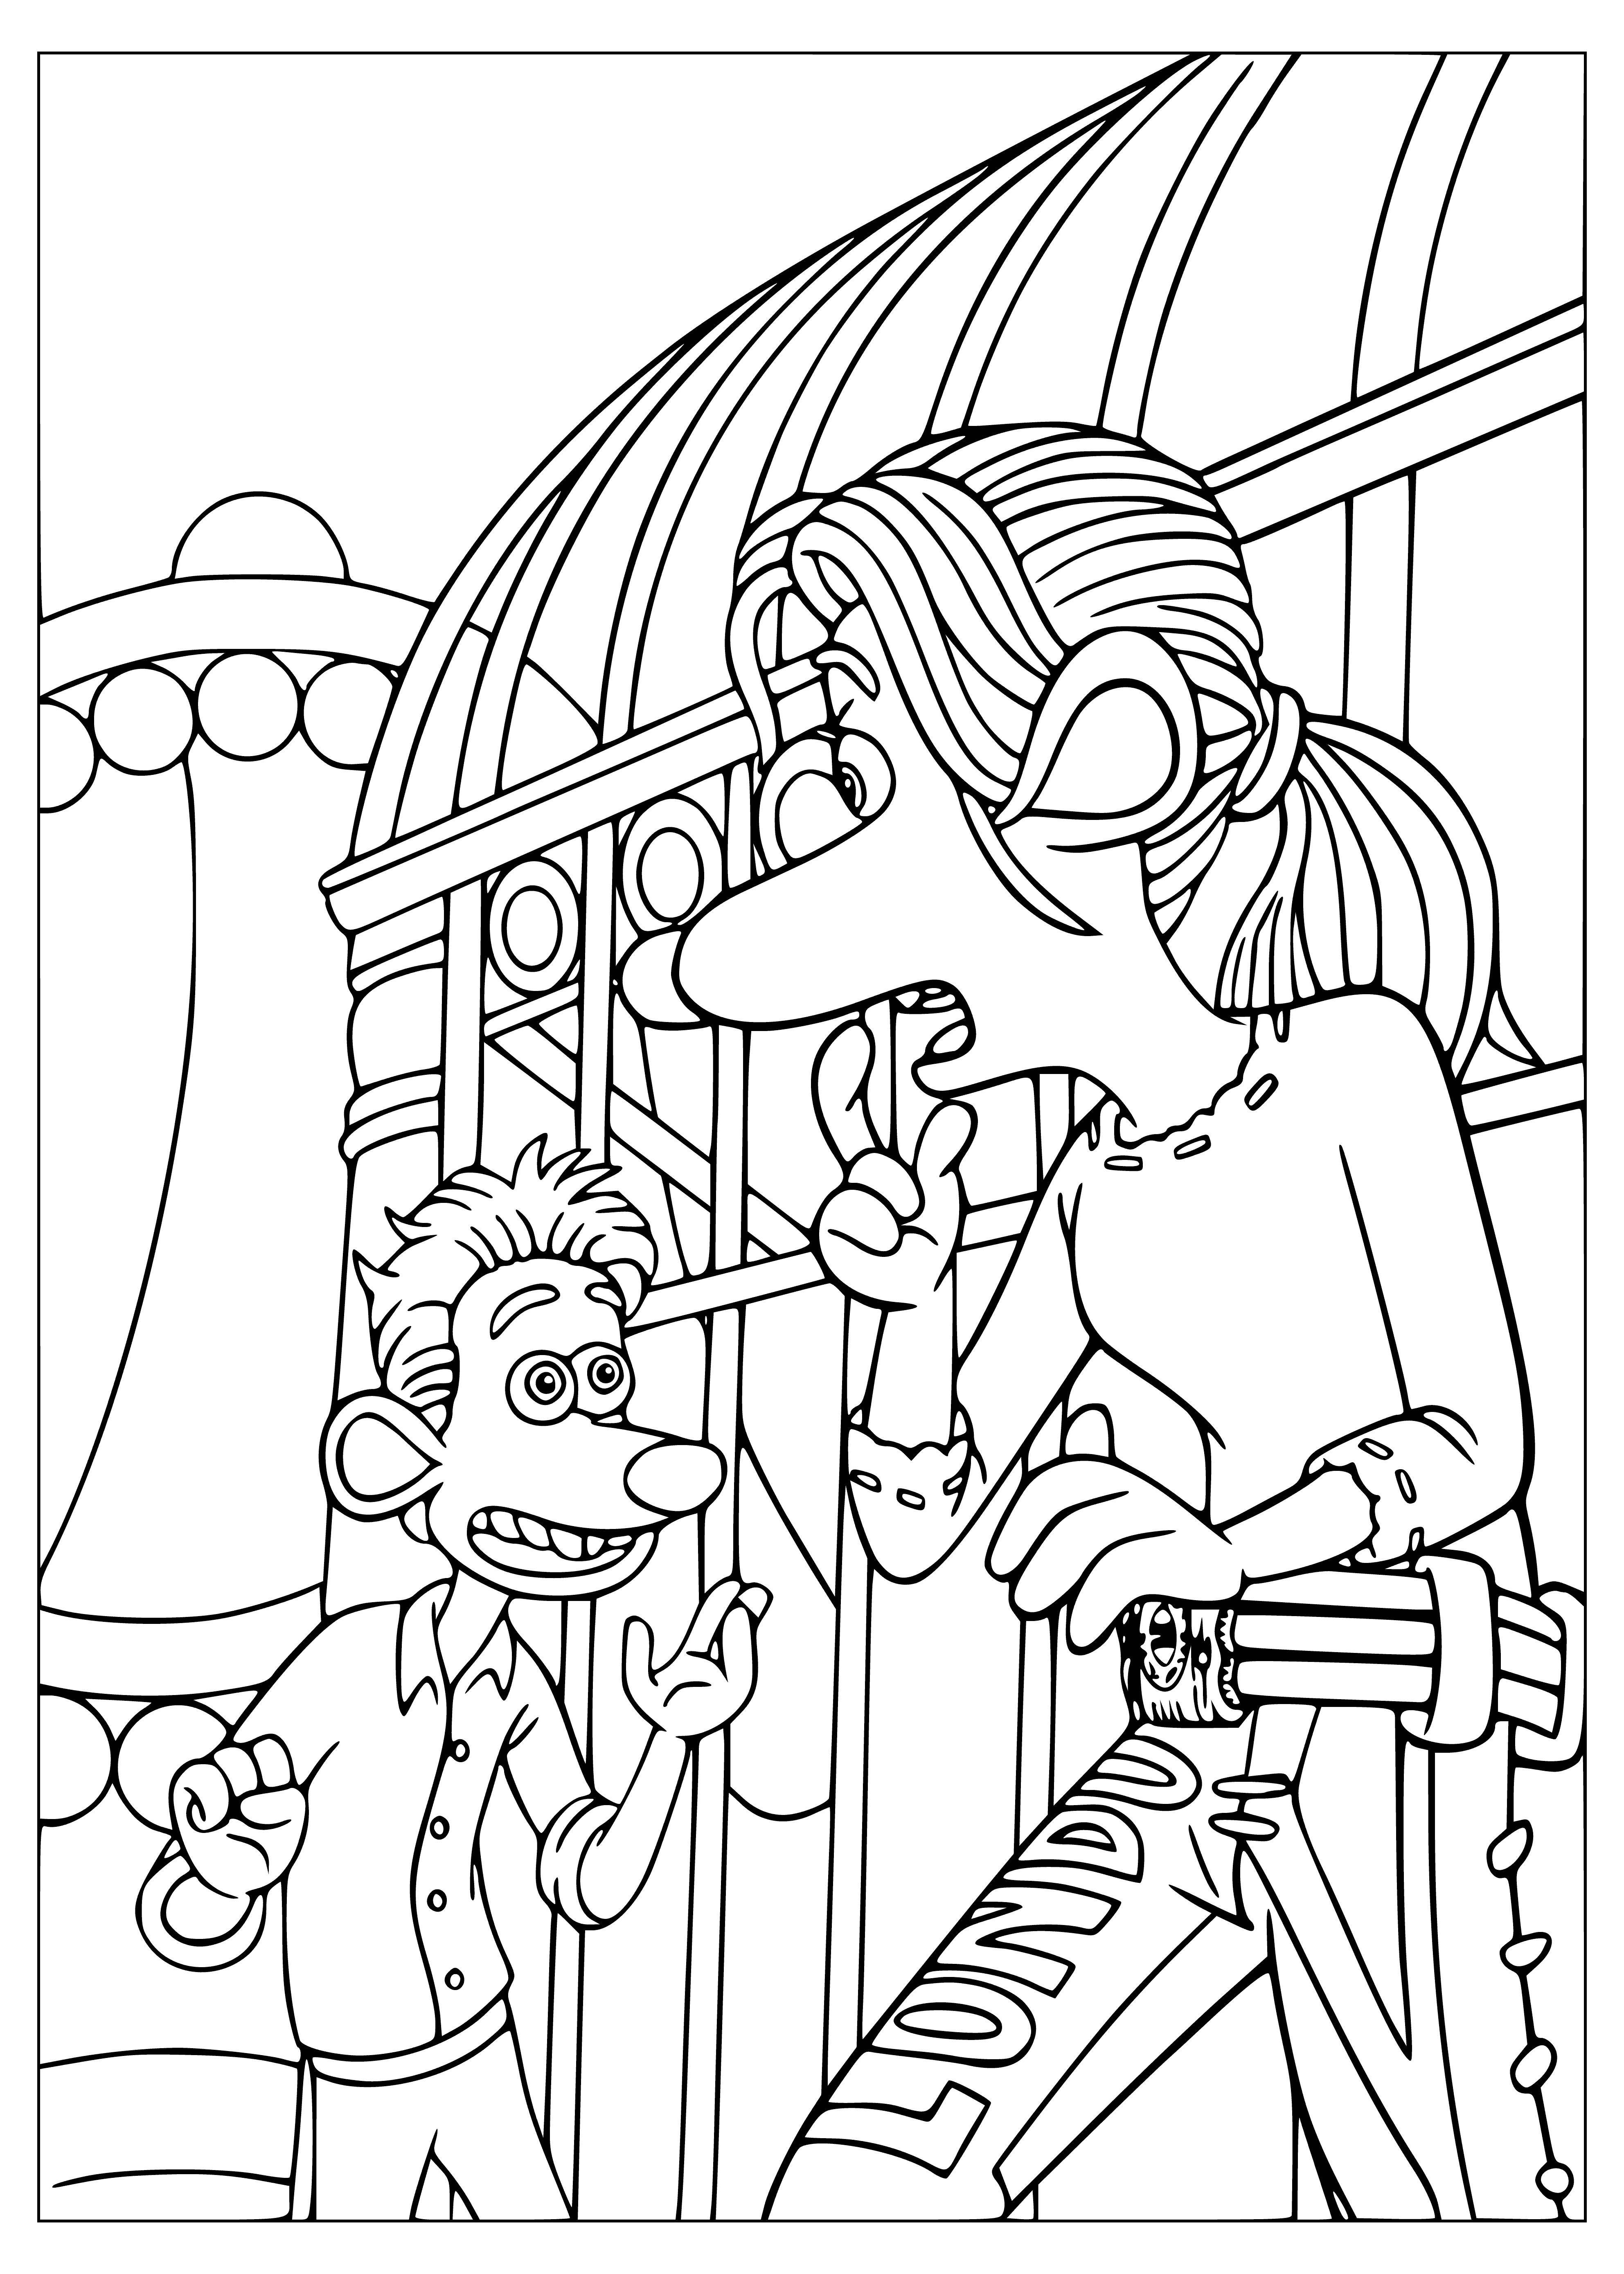 coloring page: Roddy and Rita go on an epic adventure through the sewers of London. On the journey, they meet wild animals and use their wit and intelligence to survive. In the end, they realize they're meant to be and live happily ever after.